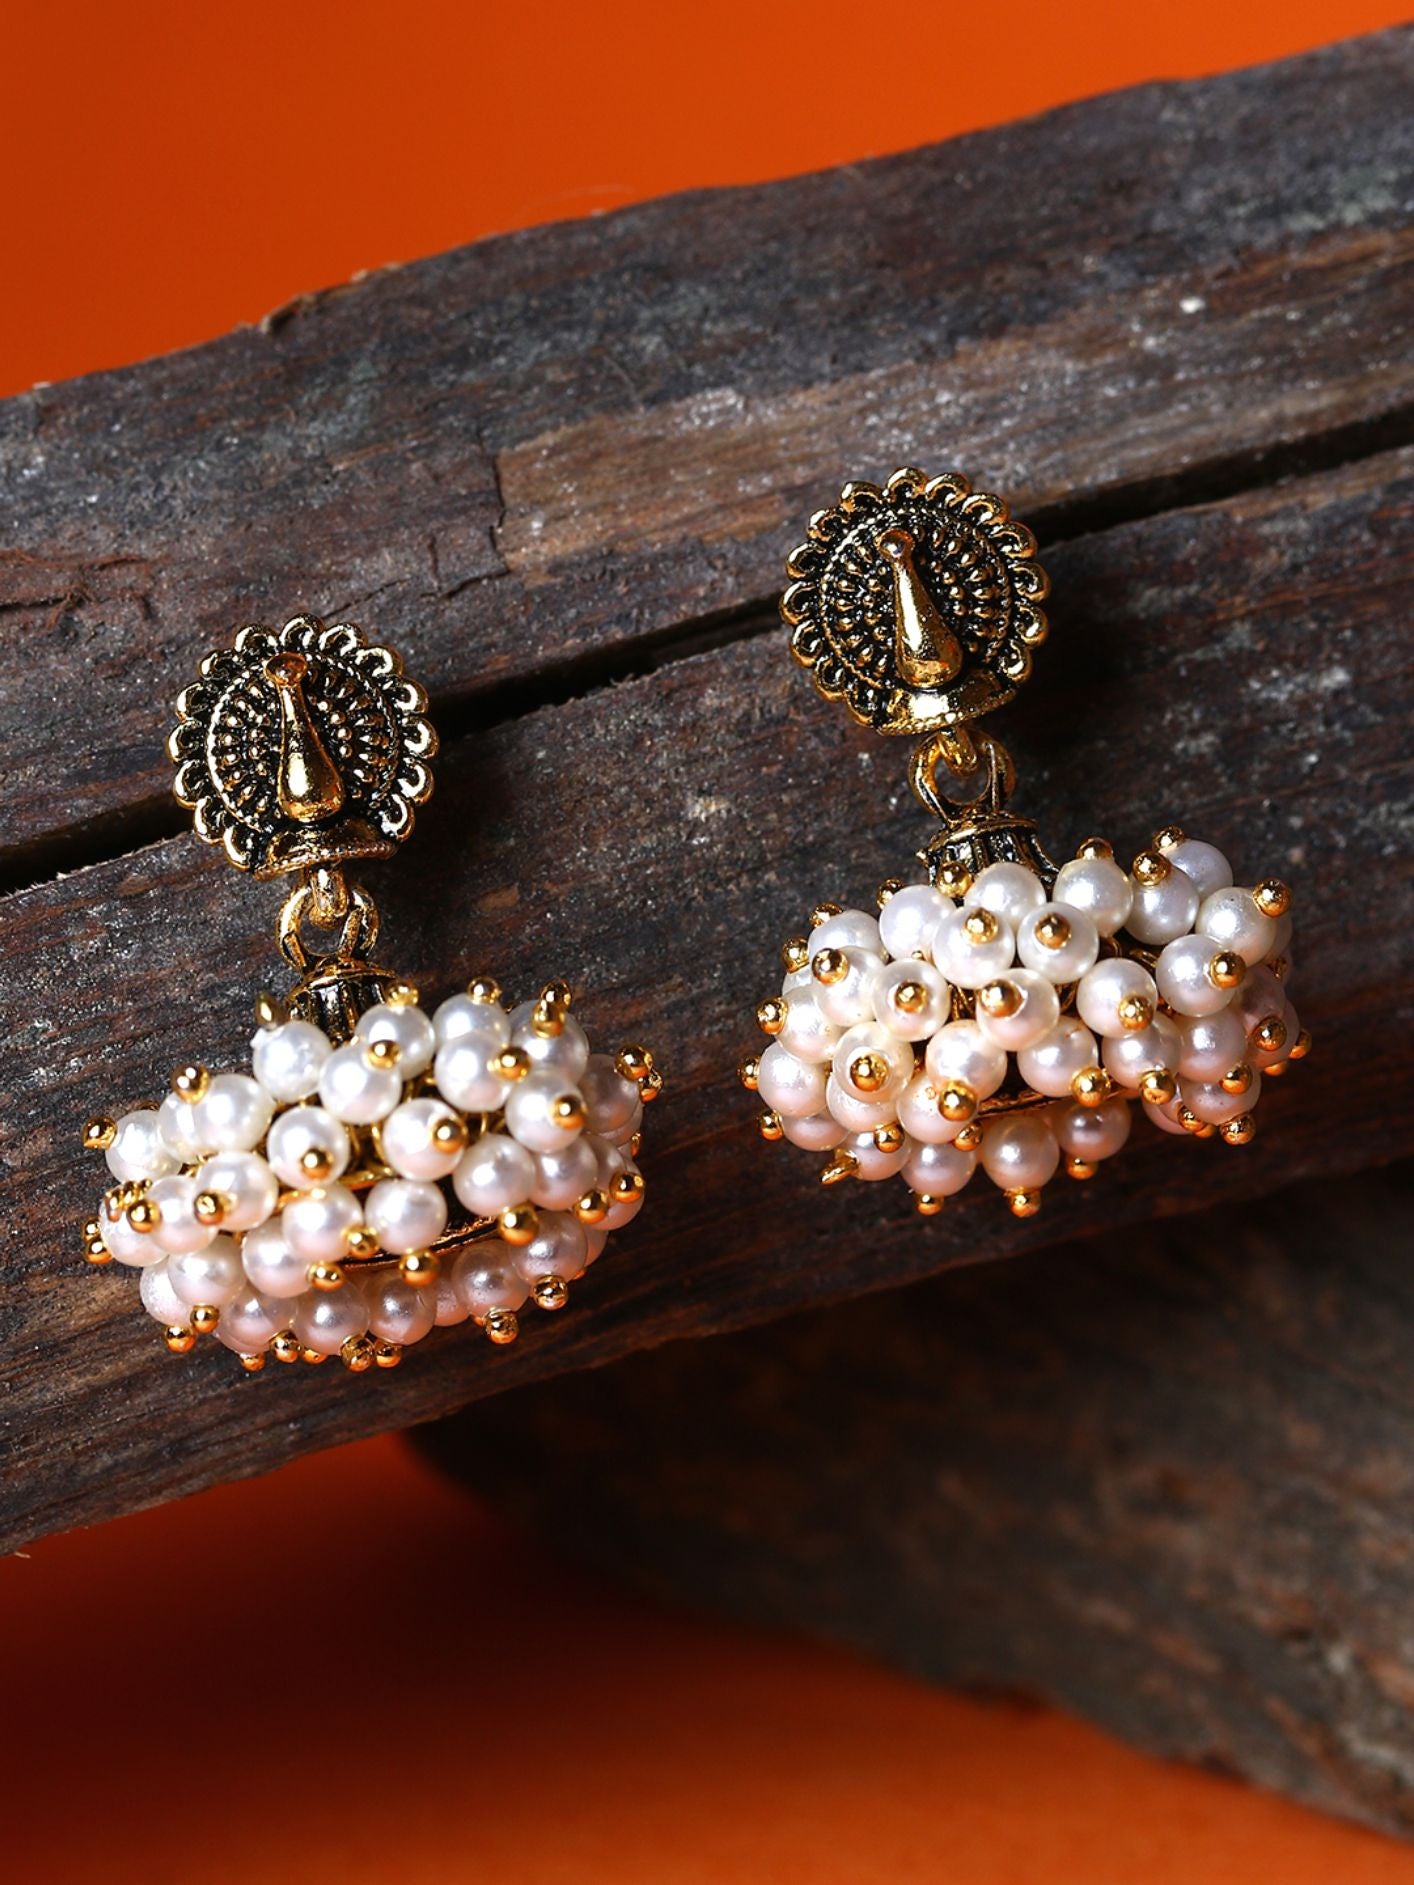 Women's Gold Plated & Off-White Enamelled Peacock Shaped Jhumkas - Anikas Creation